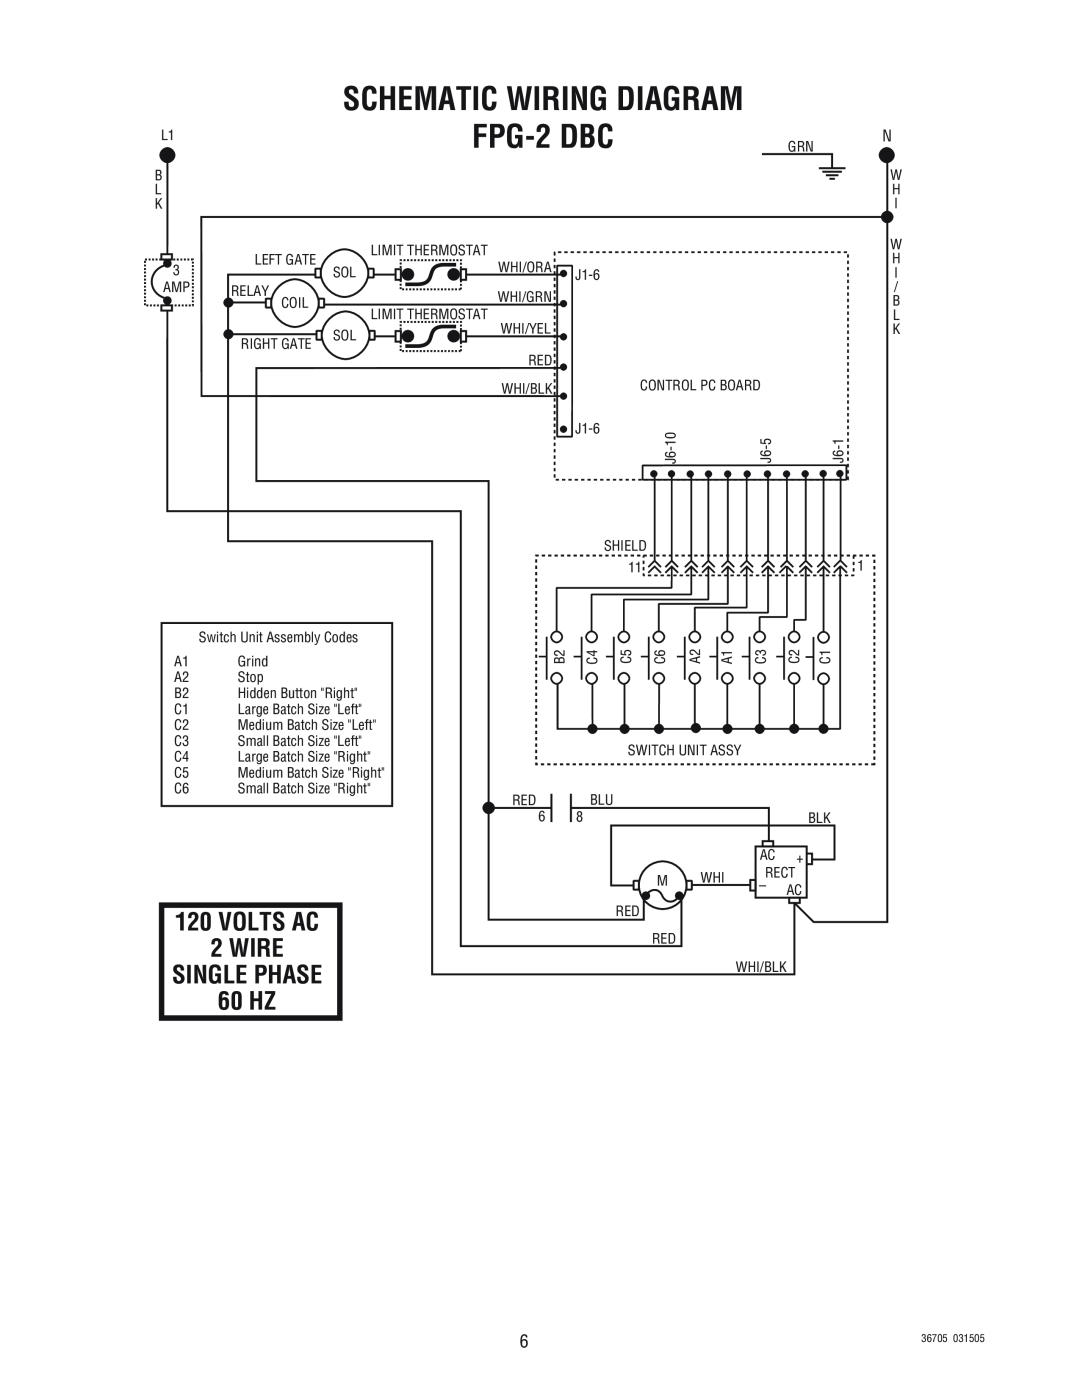 Bunn FPG-2 DBC manual VOLTS AC 2 WIRE SINGLE PHASE 60 HZ, Schematic Wiring Diagram 